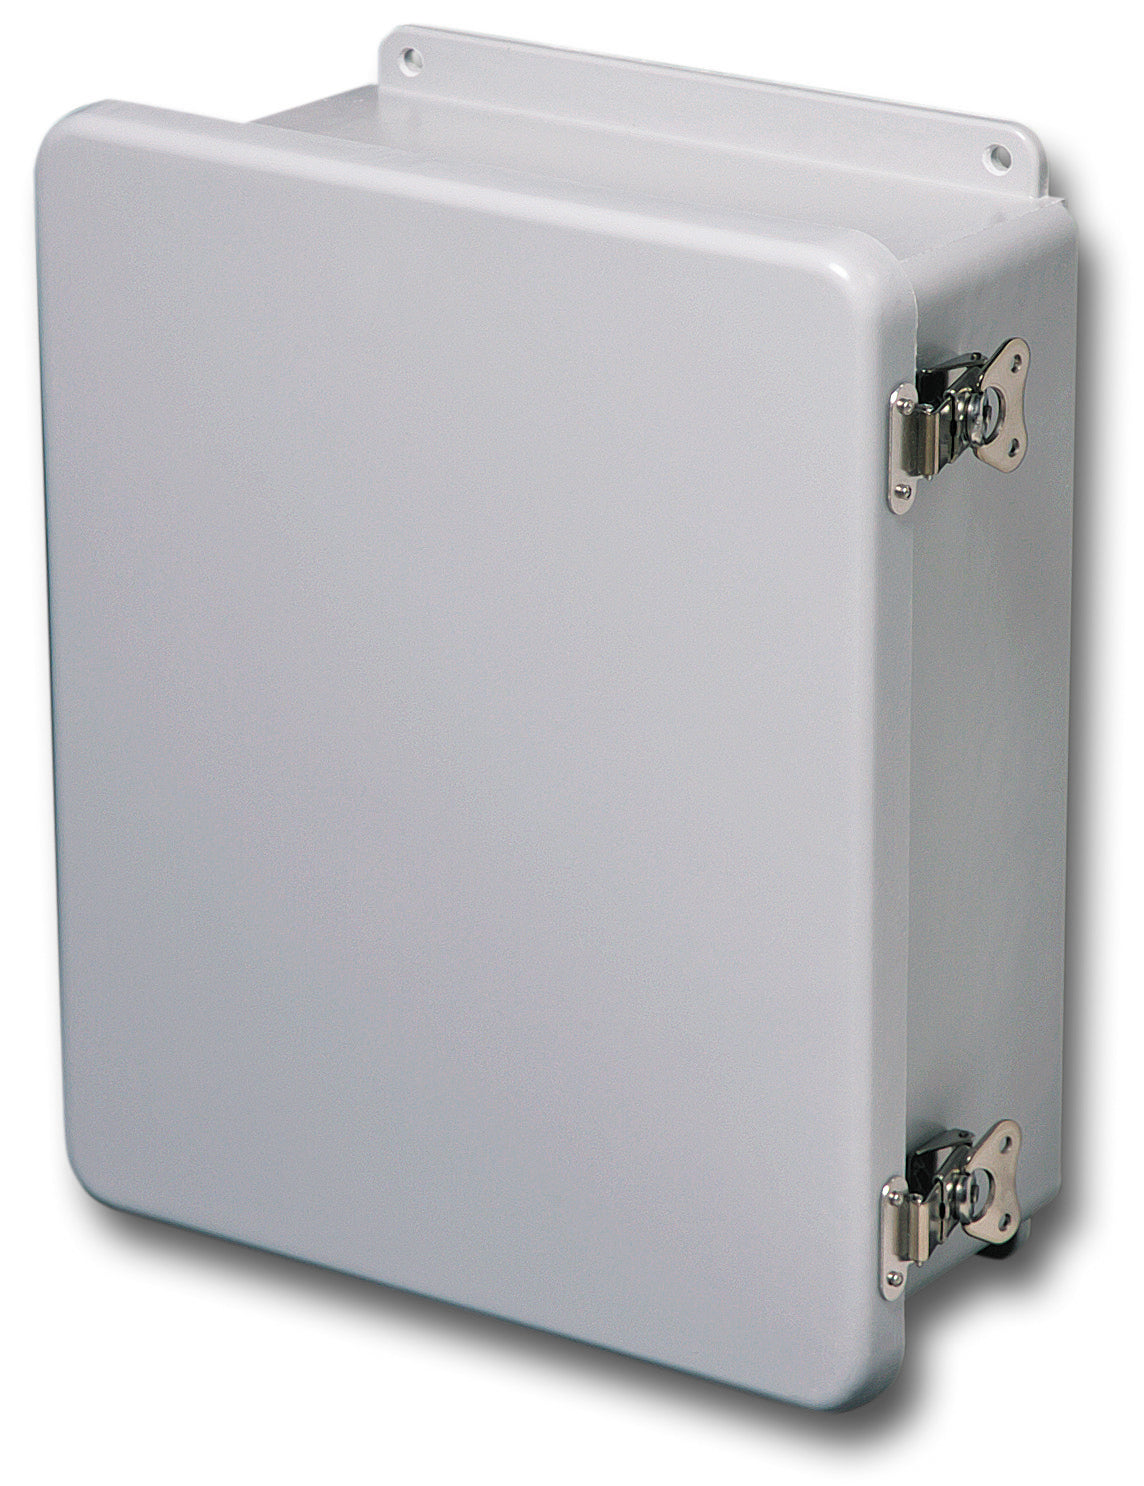 N4X   FG   CHTL Series     Fiberglass Enclosures with Hinged Cover and Twist Latch